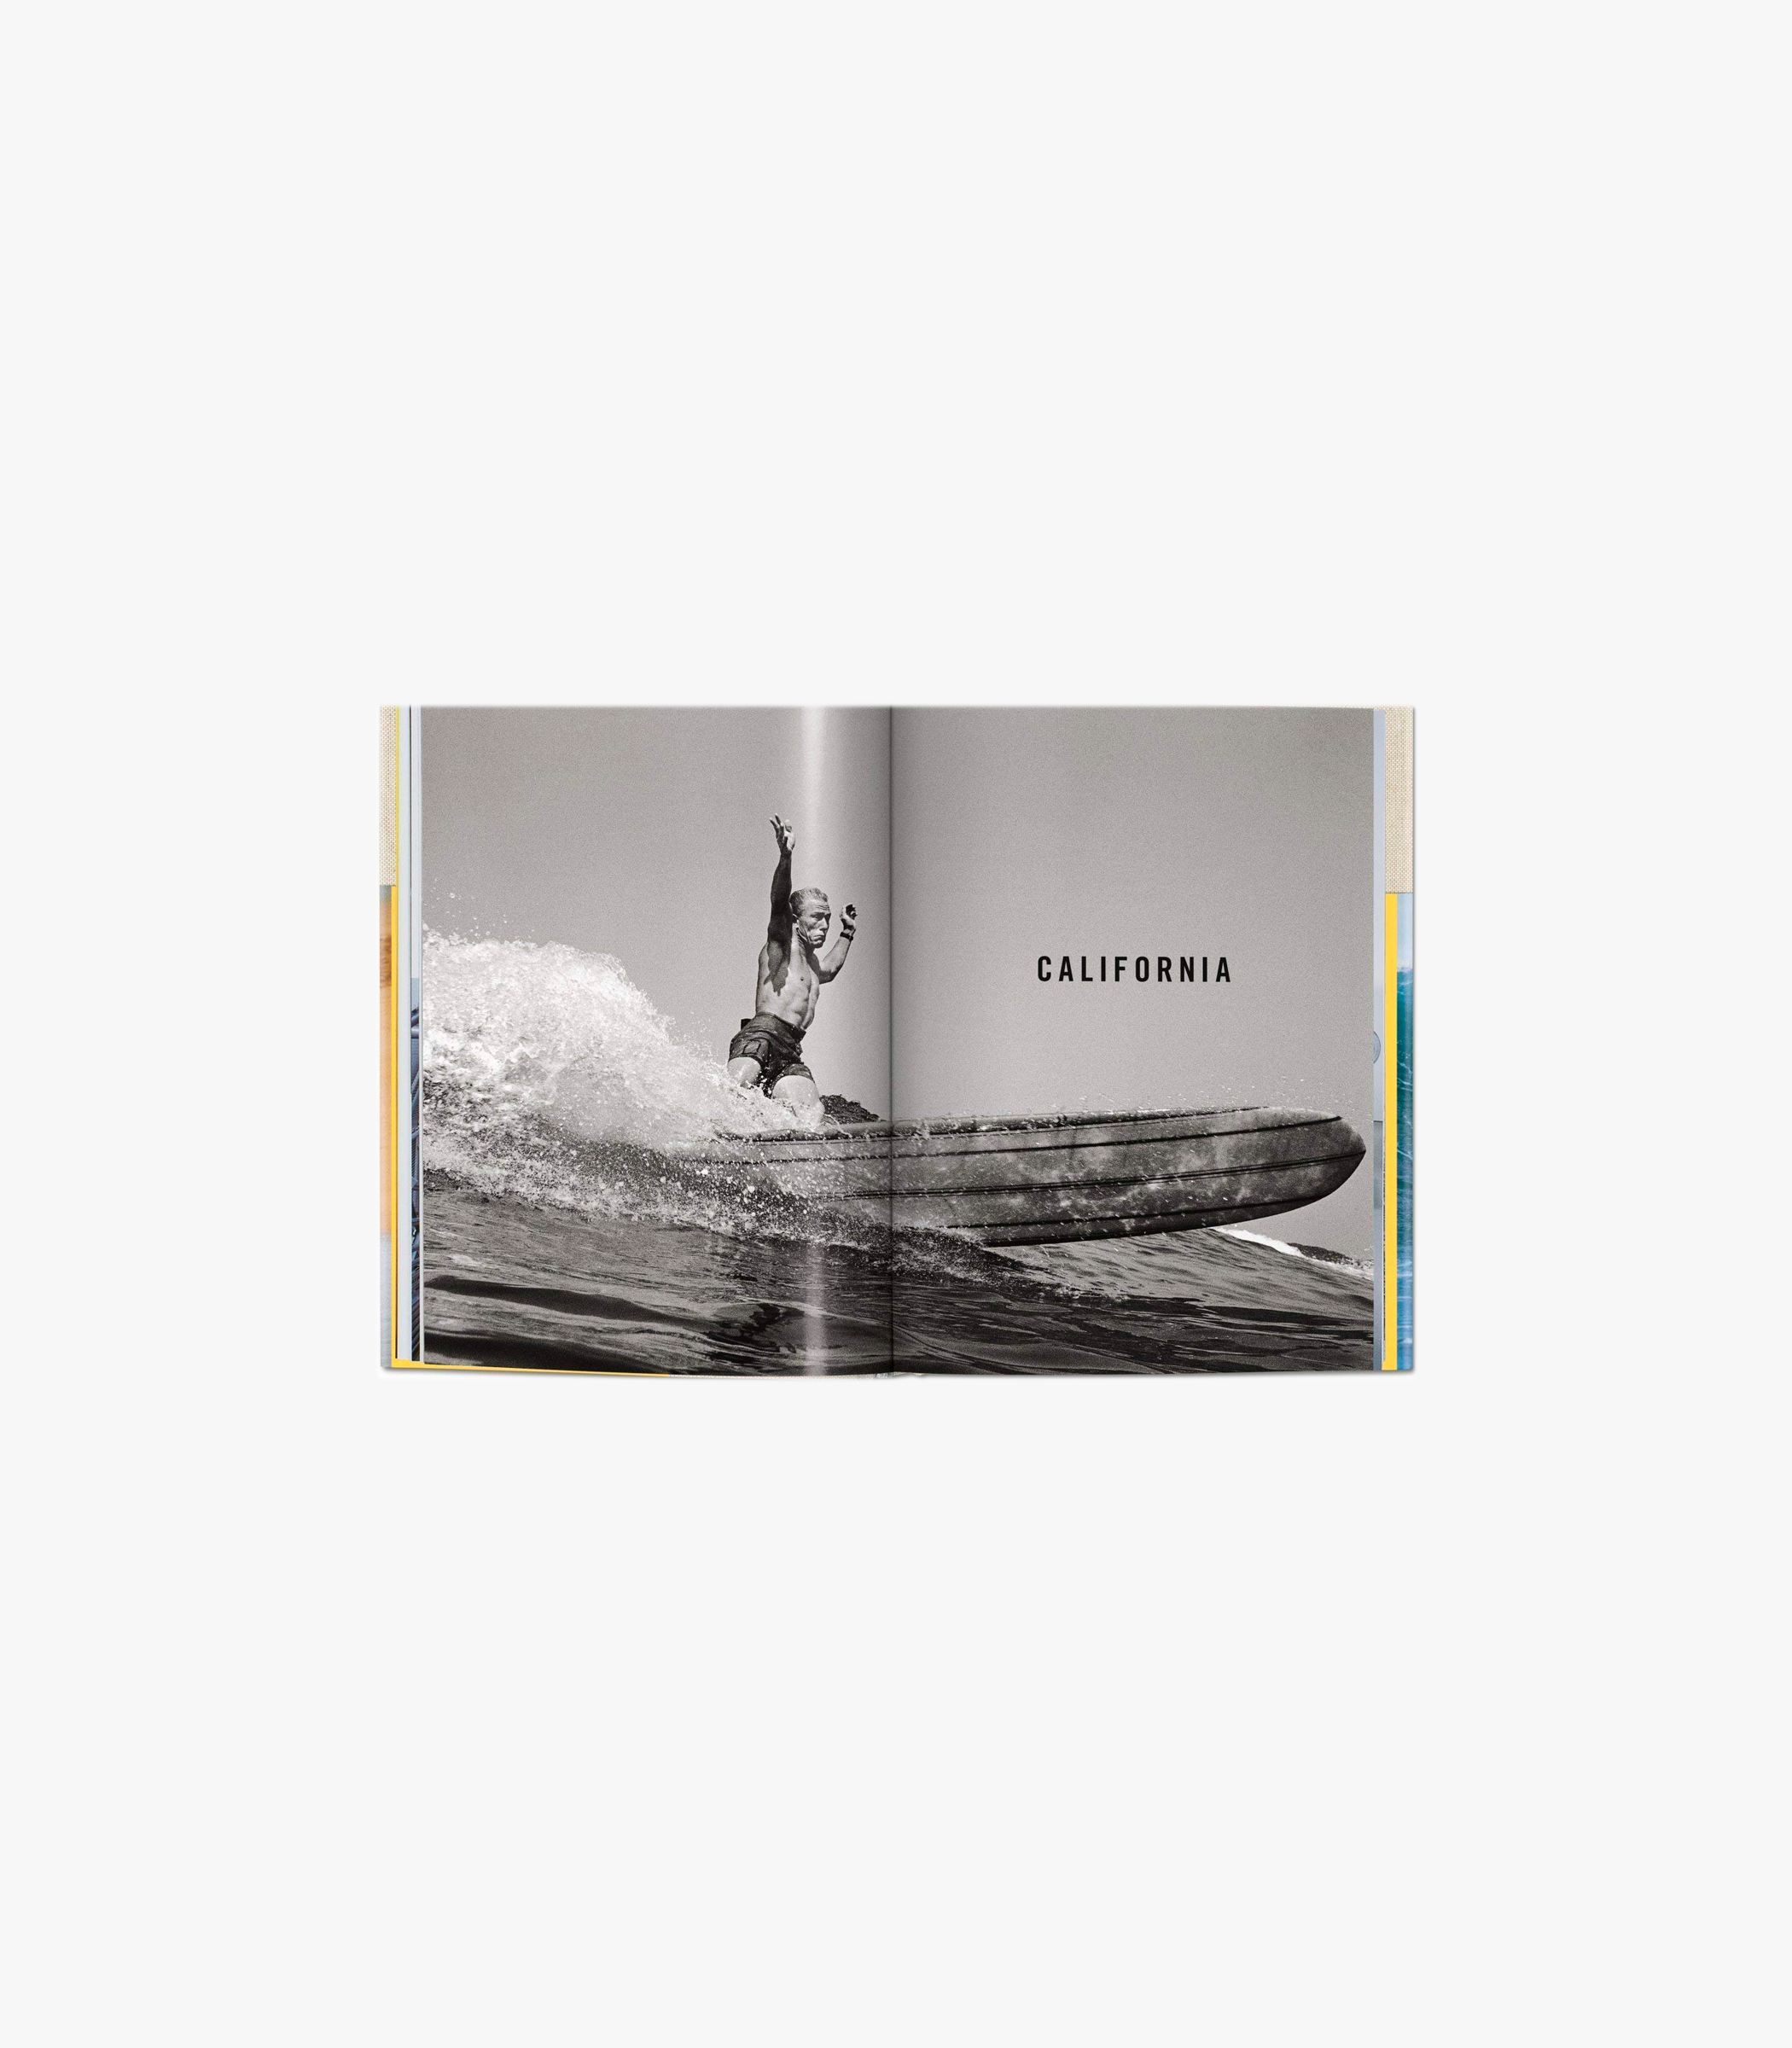 Leroy Grannis: Surf Photography of the 1960's and 1970's